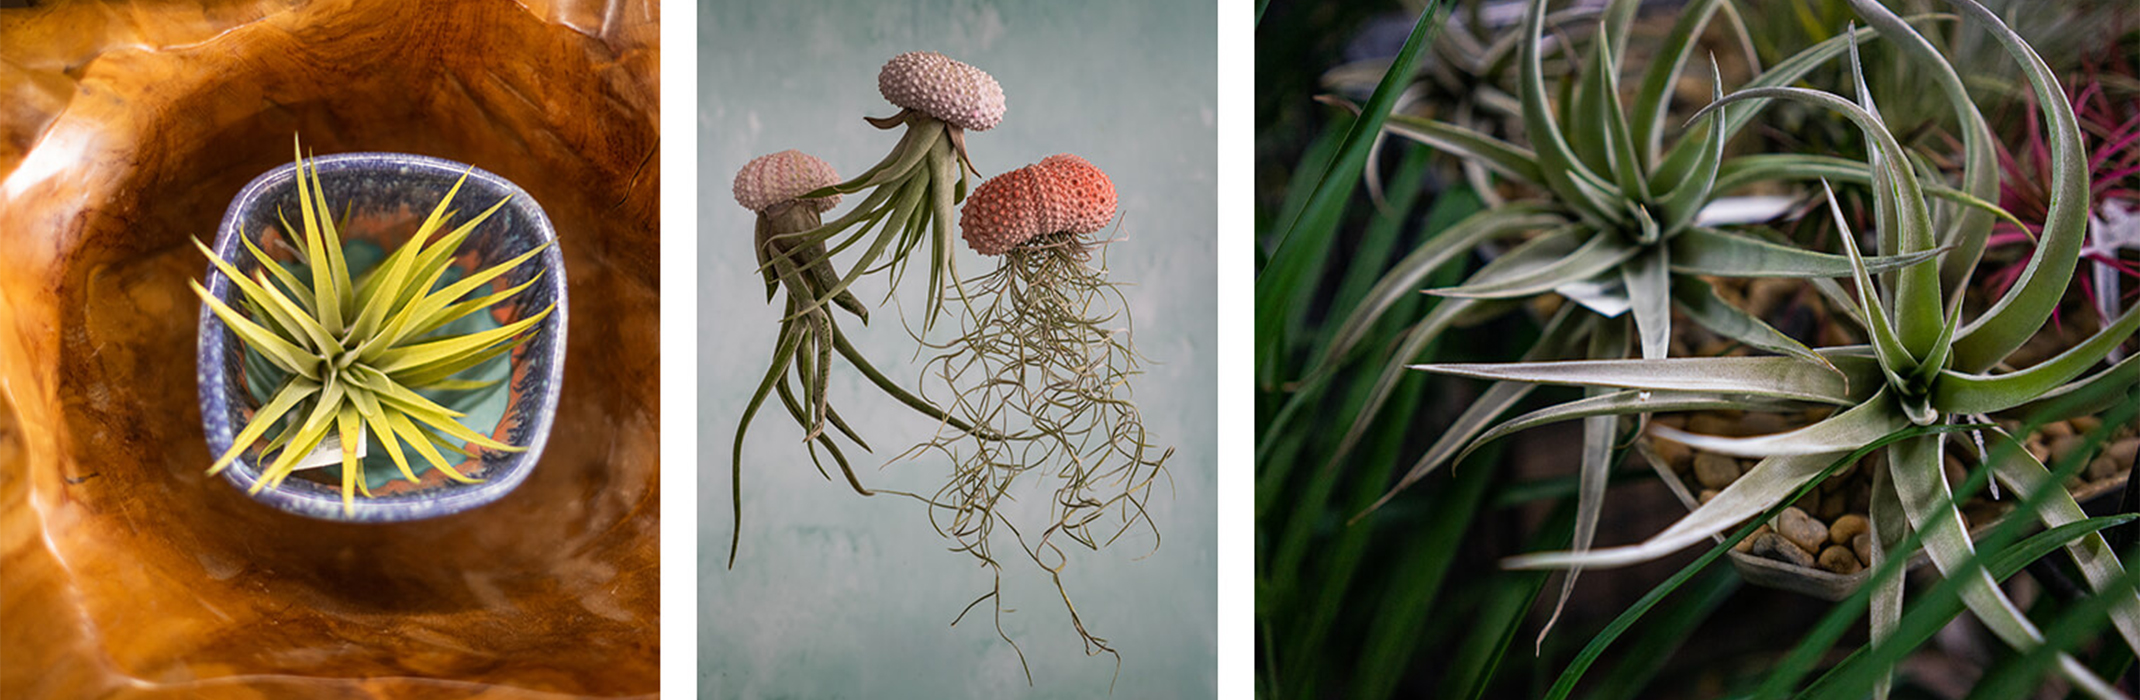 3 images: an air plant in a small colorful bowl, placed inside of a carved wooden bowl; hanging shells with tillandsias  inside them; and a close up of some air plants with a palm plant in the background